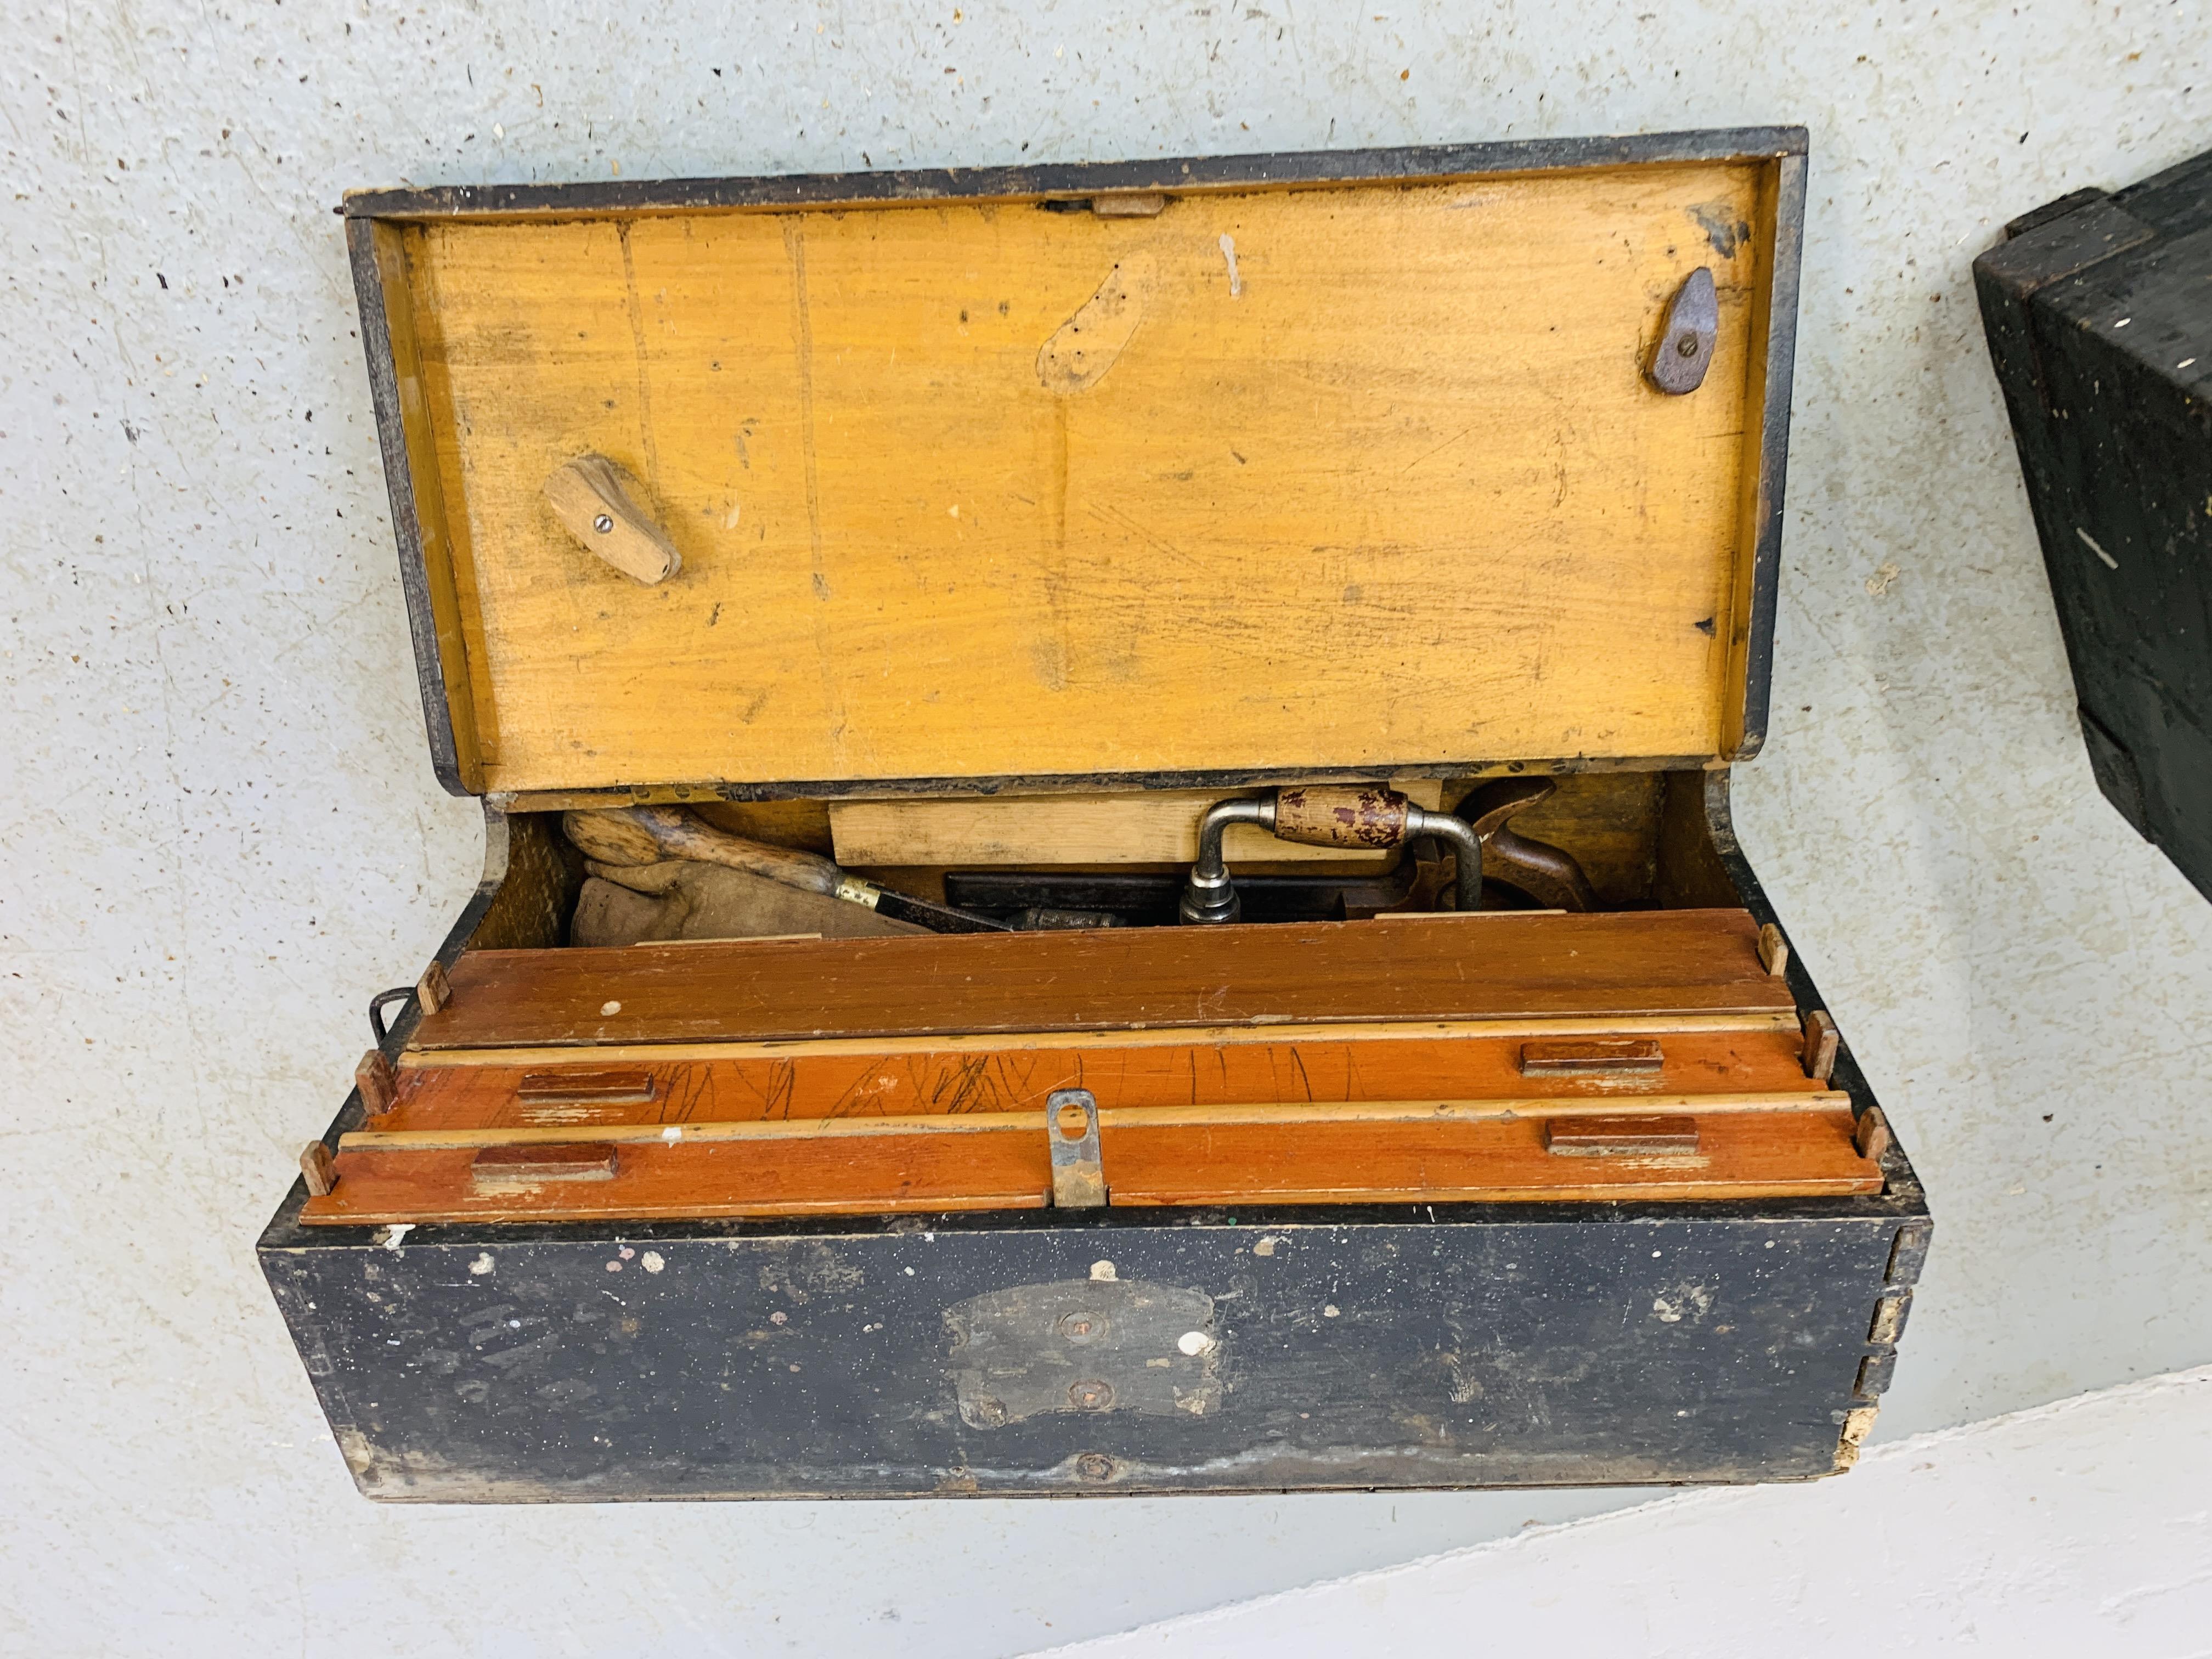 2 WOODEN CARPENTRY BOXES CONTAINING VARIOUS HAND TOOLS TO INCLUDE PLANES, FILES, MEASURES ETC. - Image 4 of 8